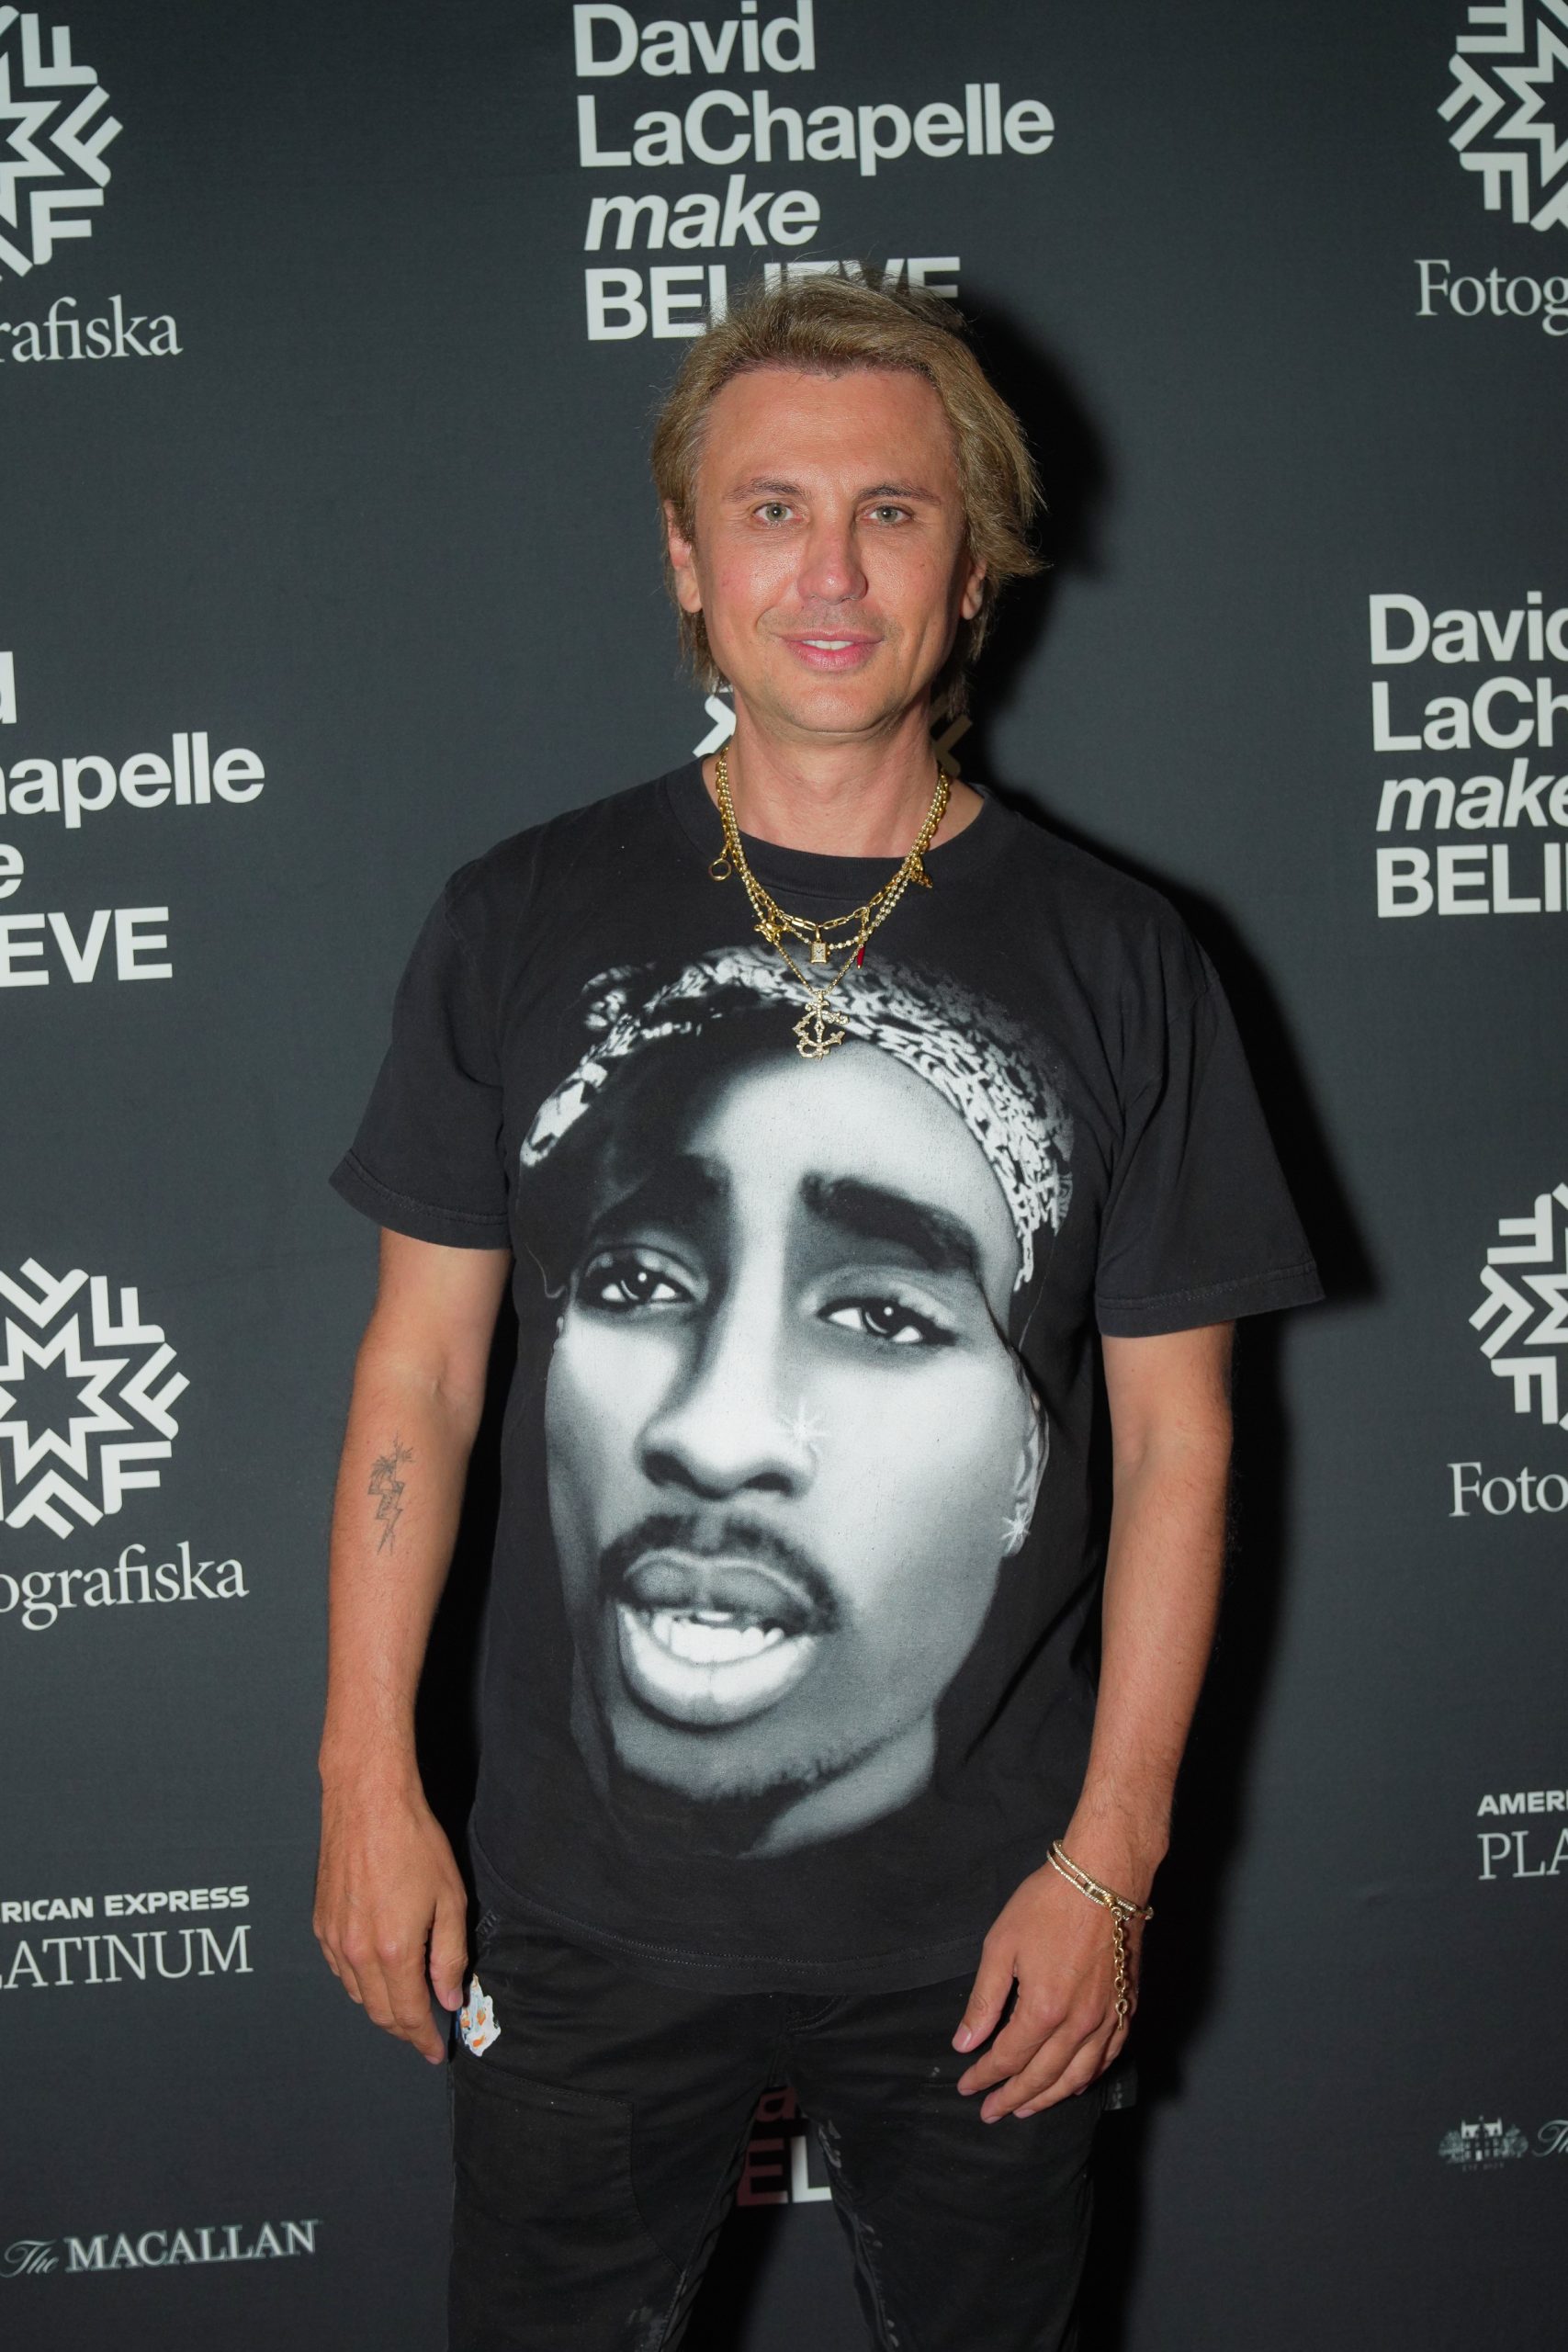 David Lachapelle Make Believe Opening At Fotografiska New York During Nyfw The Impression 